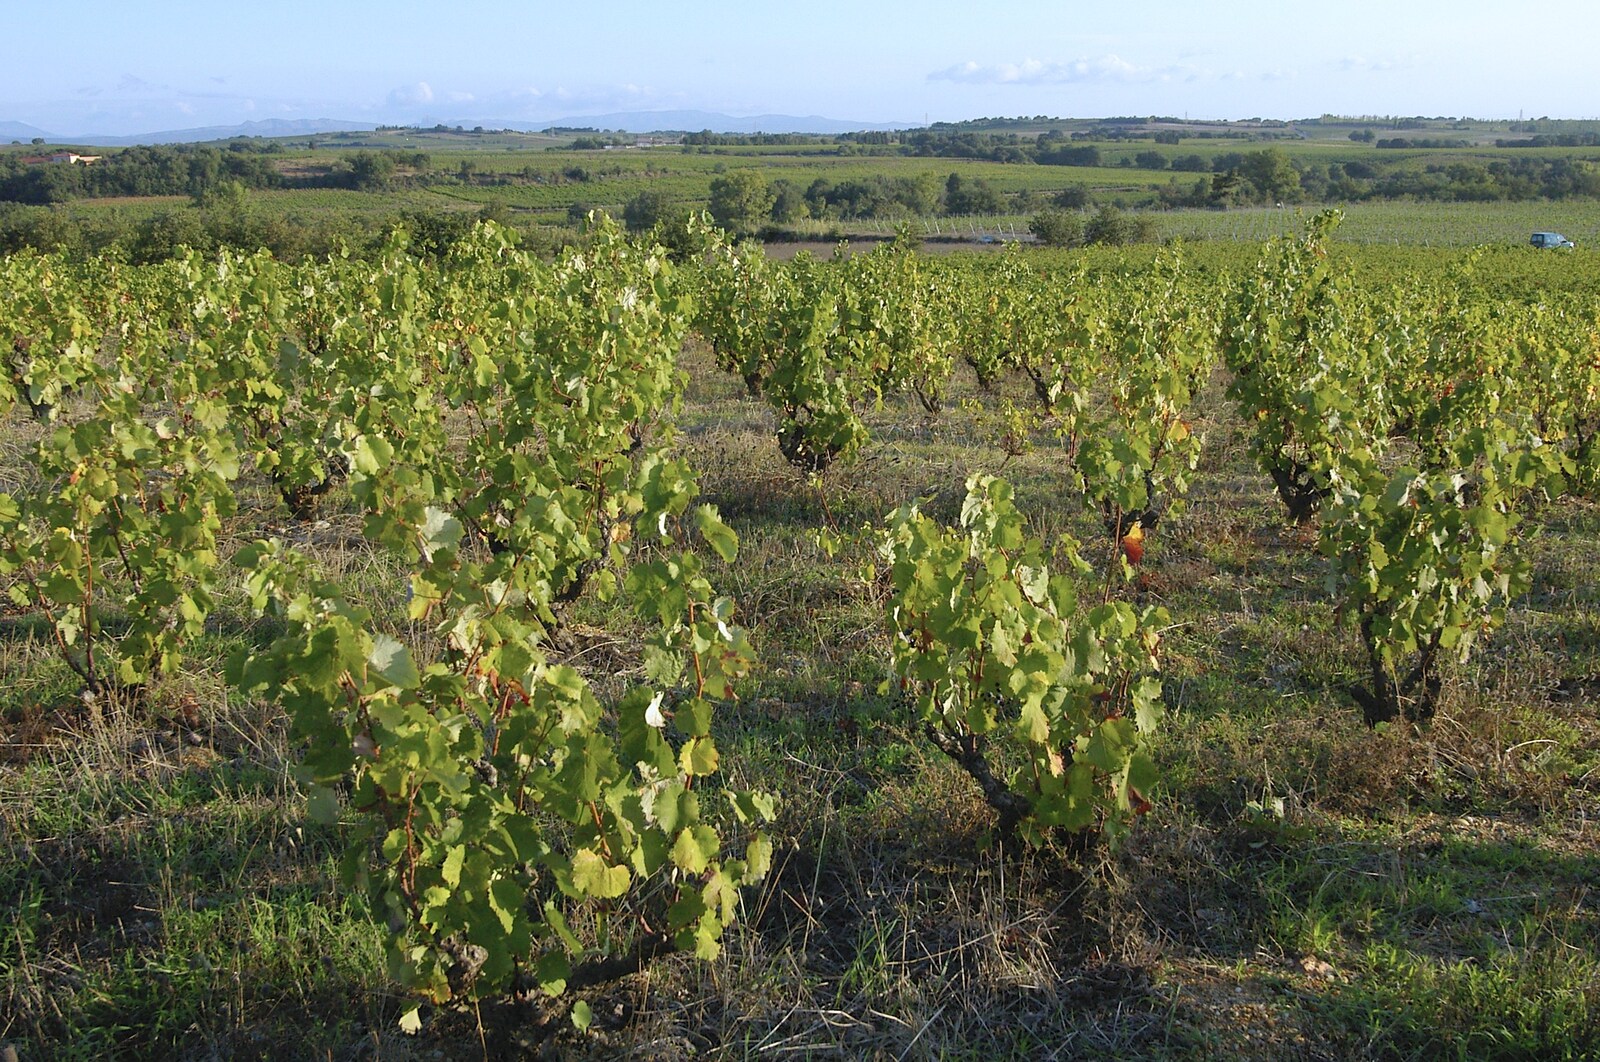 The vines from Grape Picking and Pressing, Roussillon, France - 19th September 2006